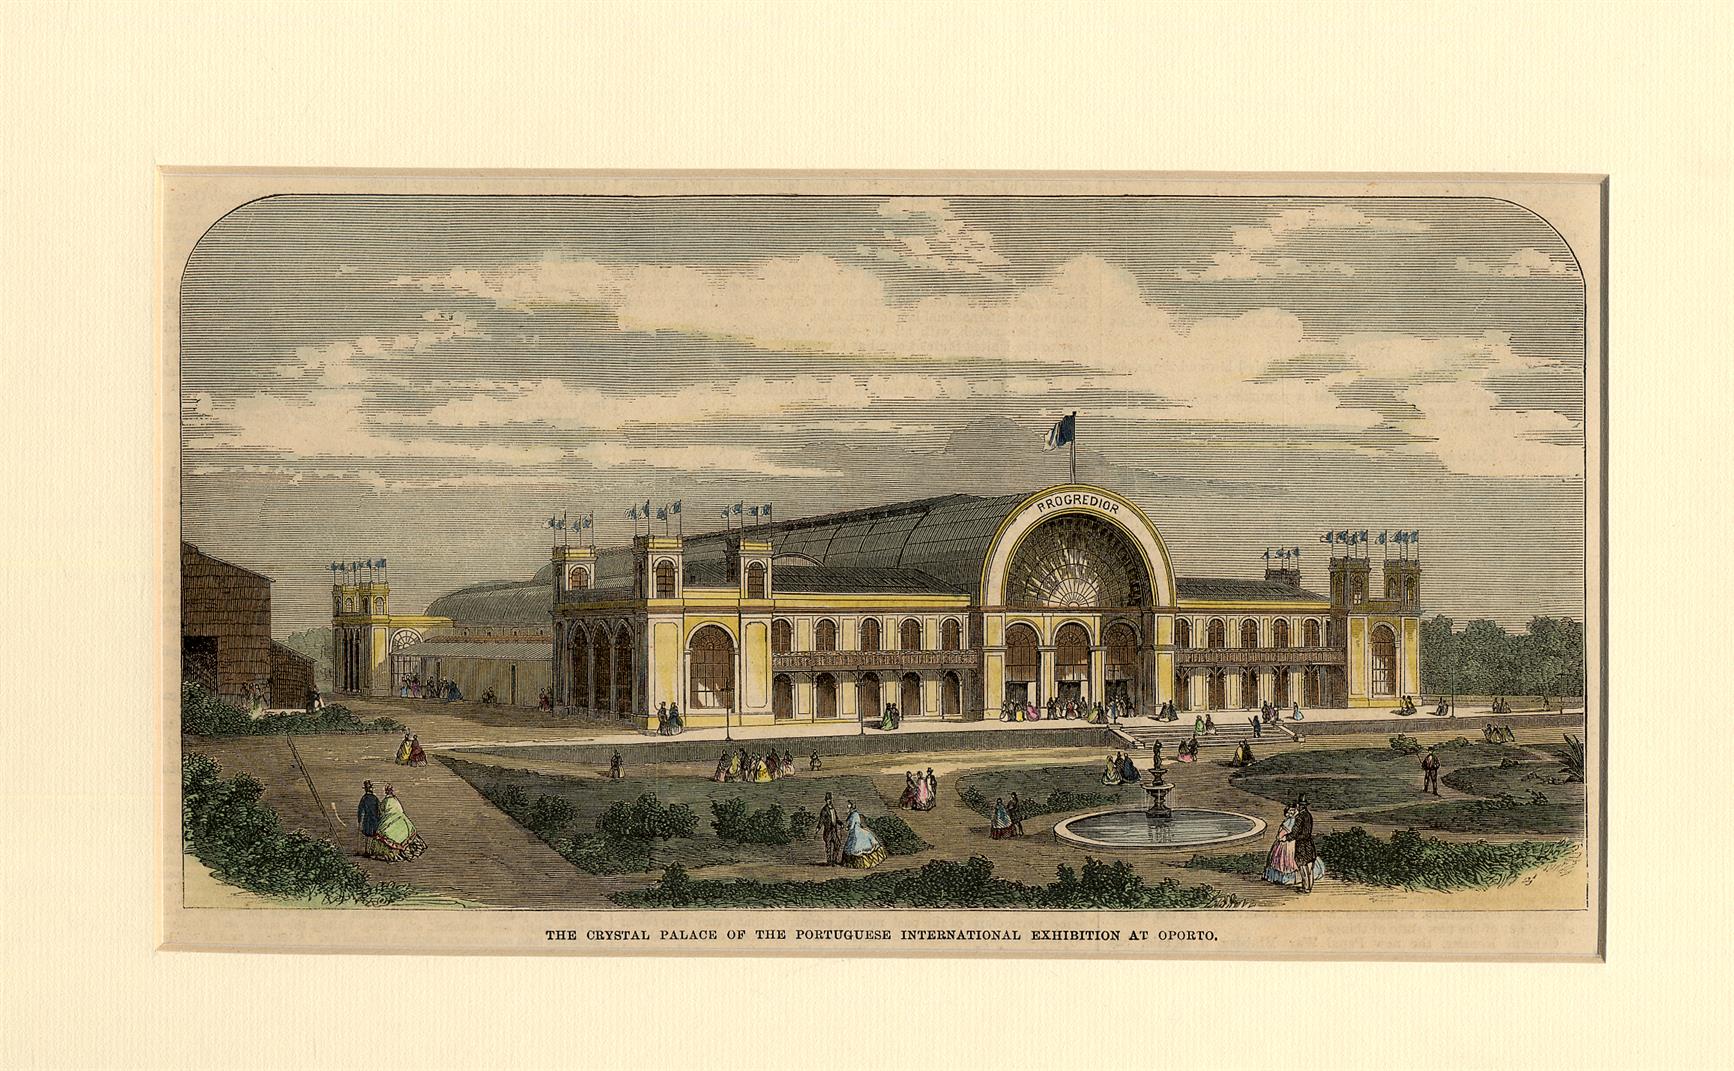 The Crystal Palace of the Portuguese International Exhibition at Oporto